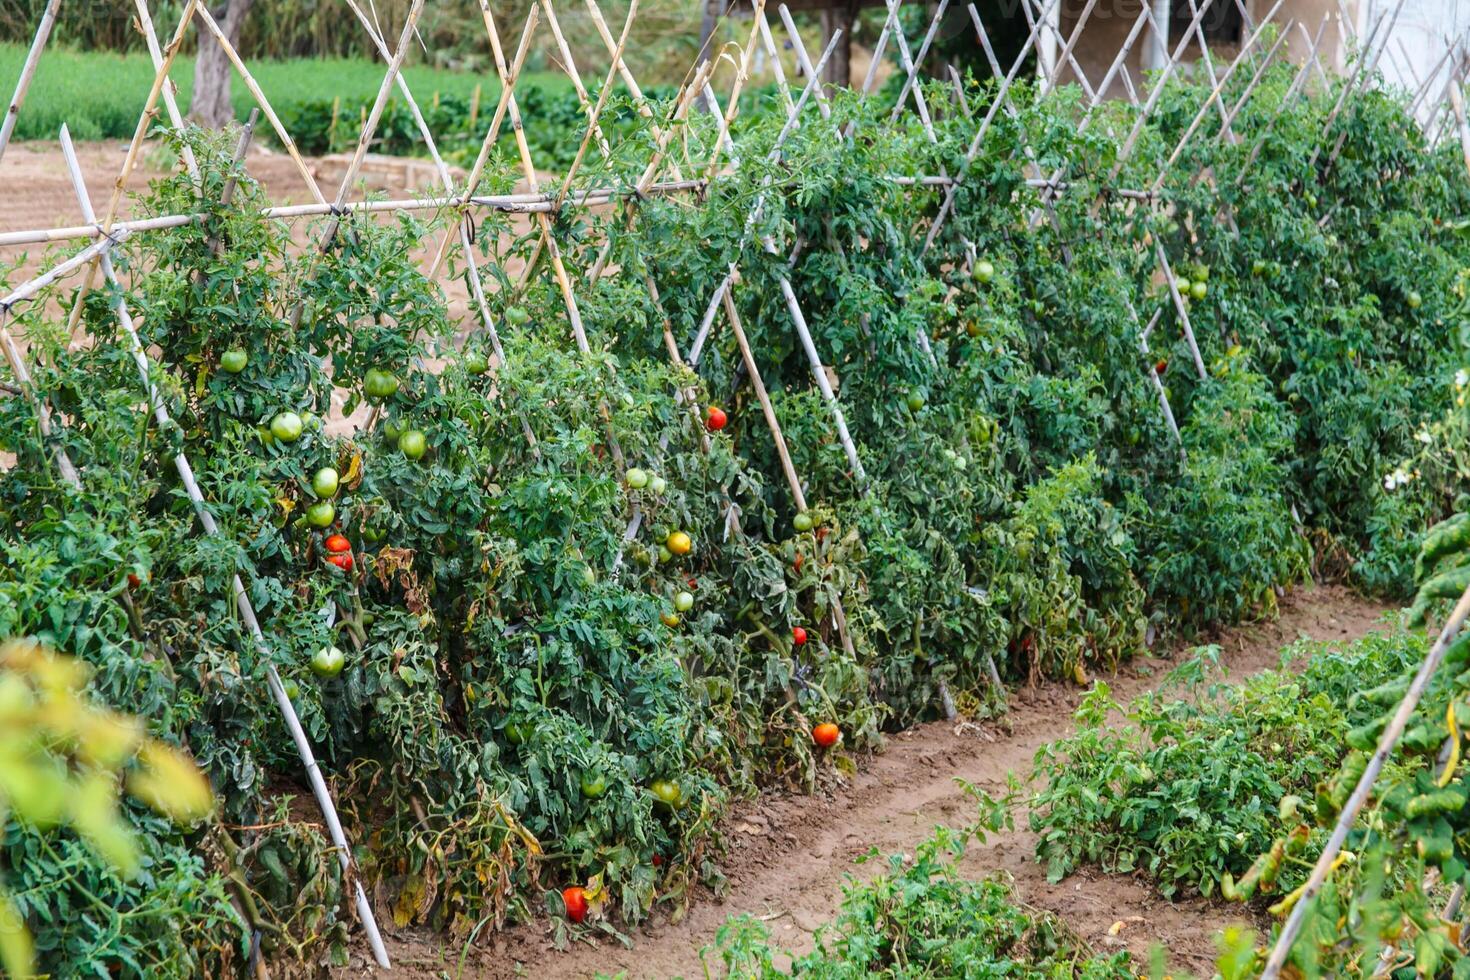 Ripening tomatoes in the open field. photo